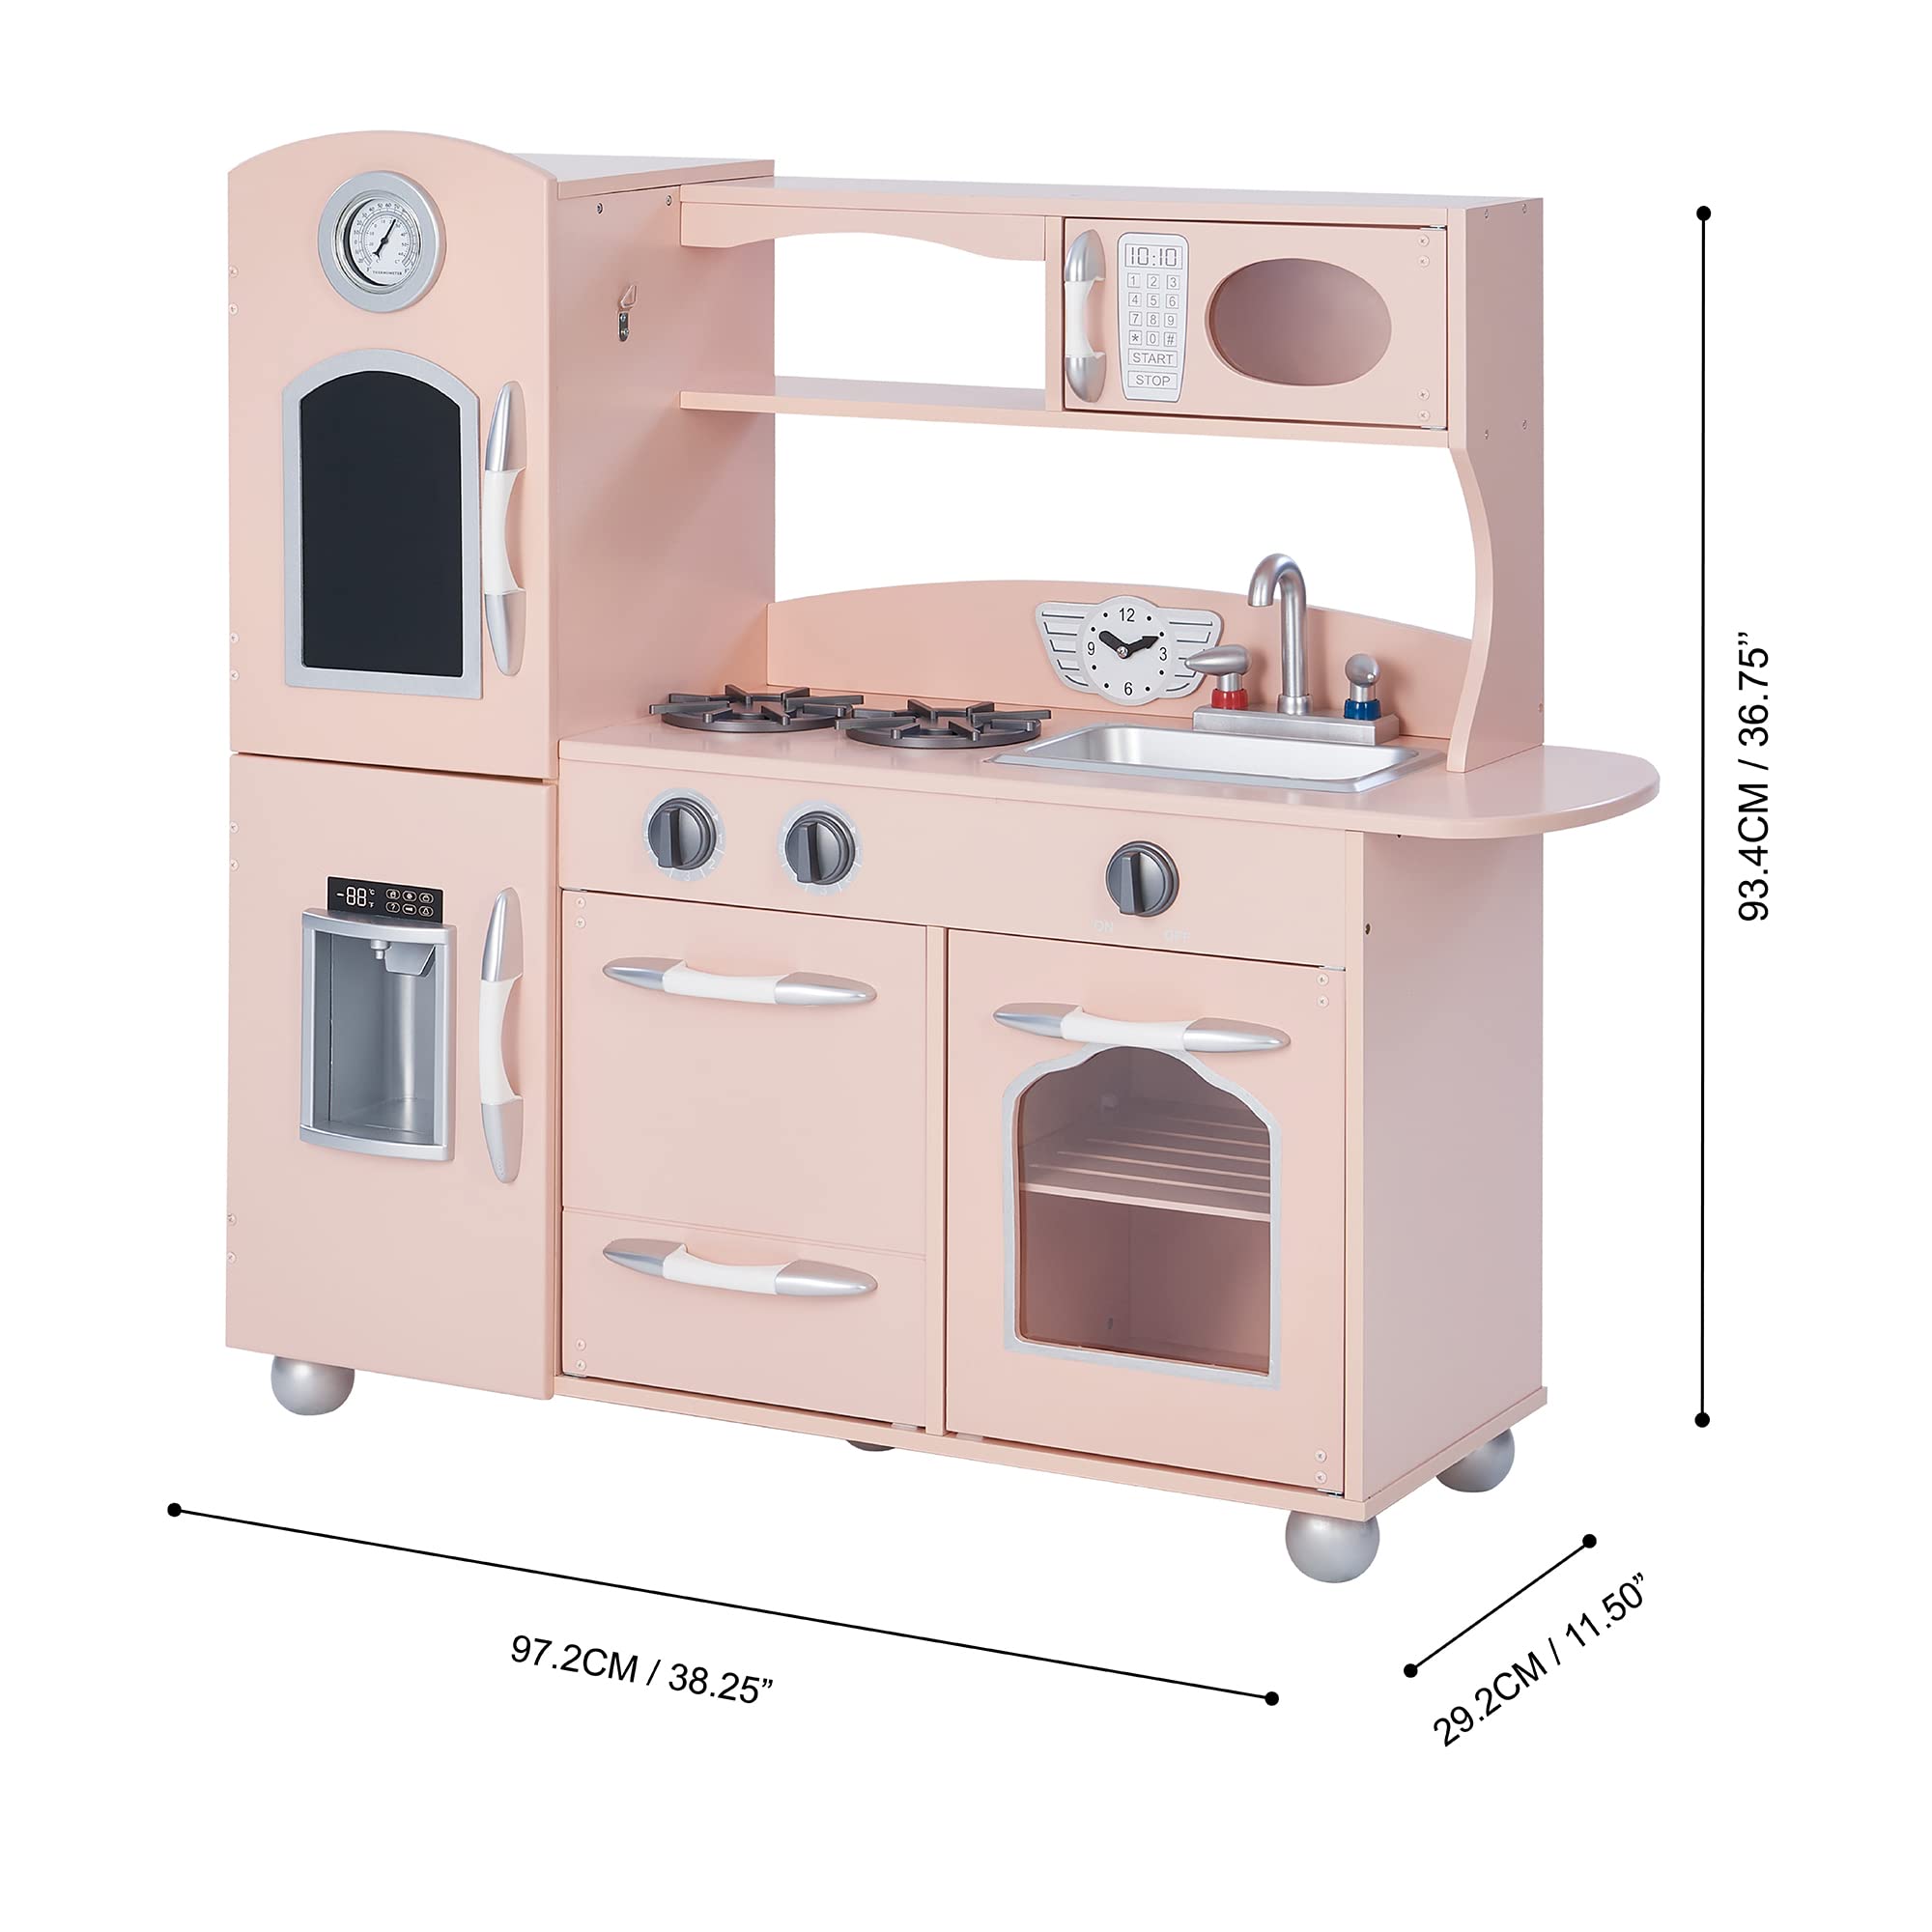 Teamson Kids - Retro Play Kitchen with Refrigerator. Freezer. Oven and Dishwasher - Pink (1 Pcs)